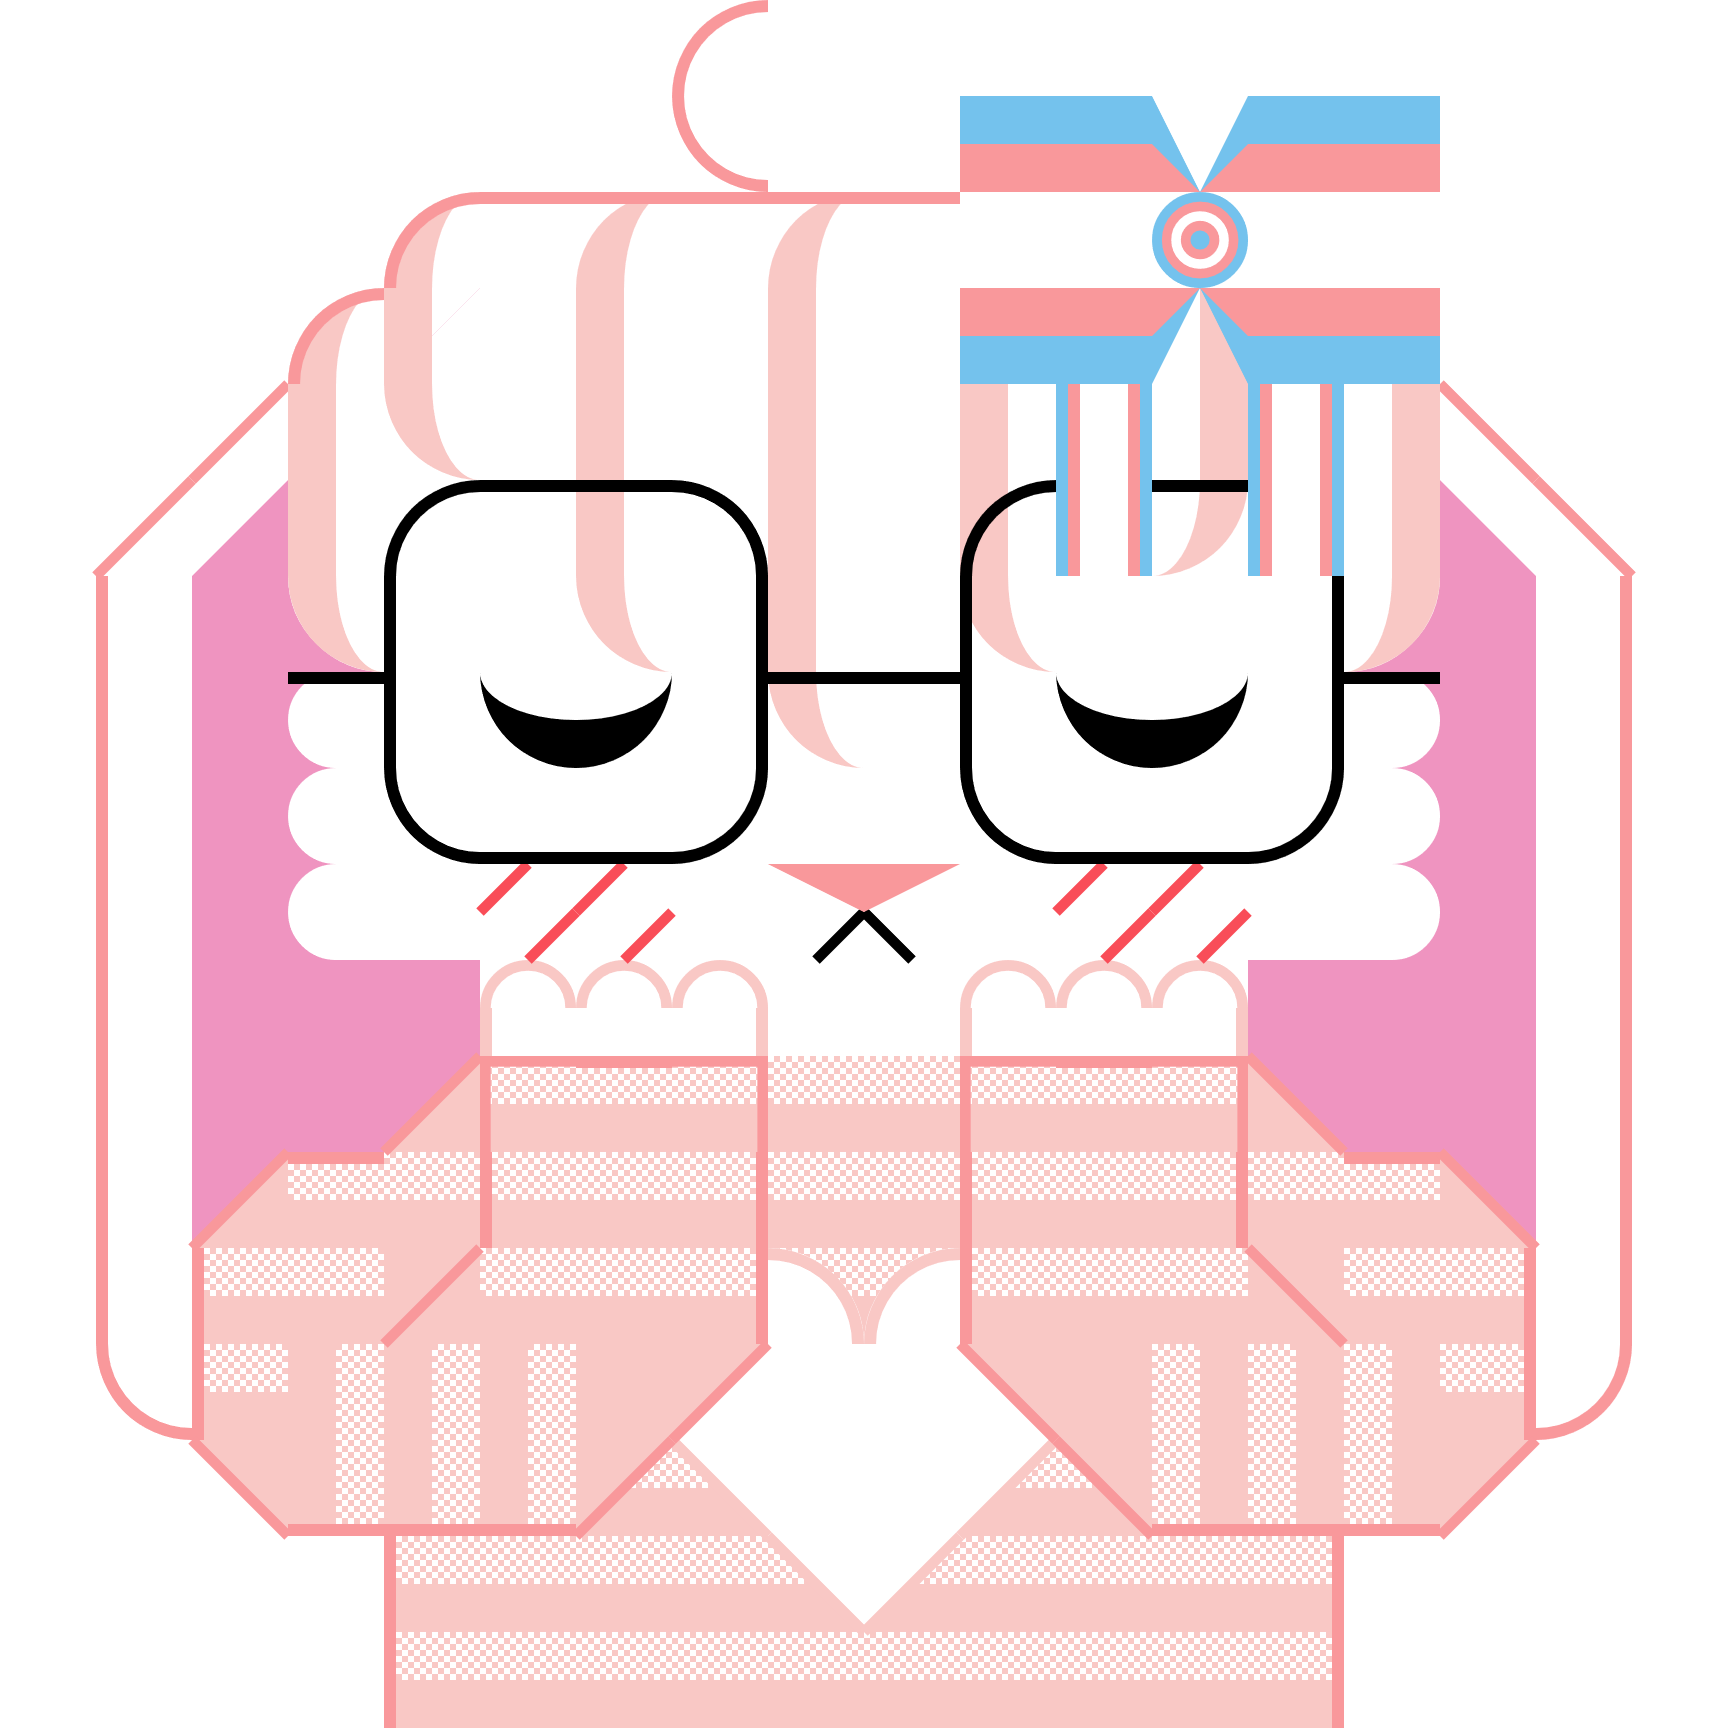 Modular vector shape artwork of a white bunny wearing a trans pride hair bow, glasses and a pink and white sweater. They're holding their paws up against their face and blushing with their eyes closed.